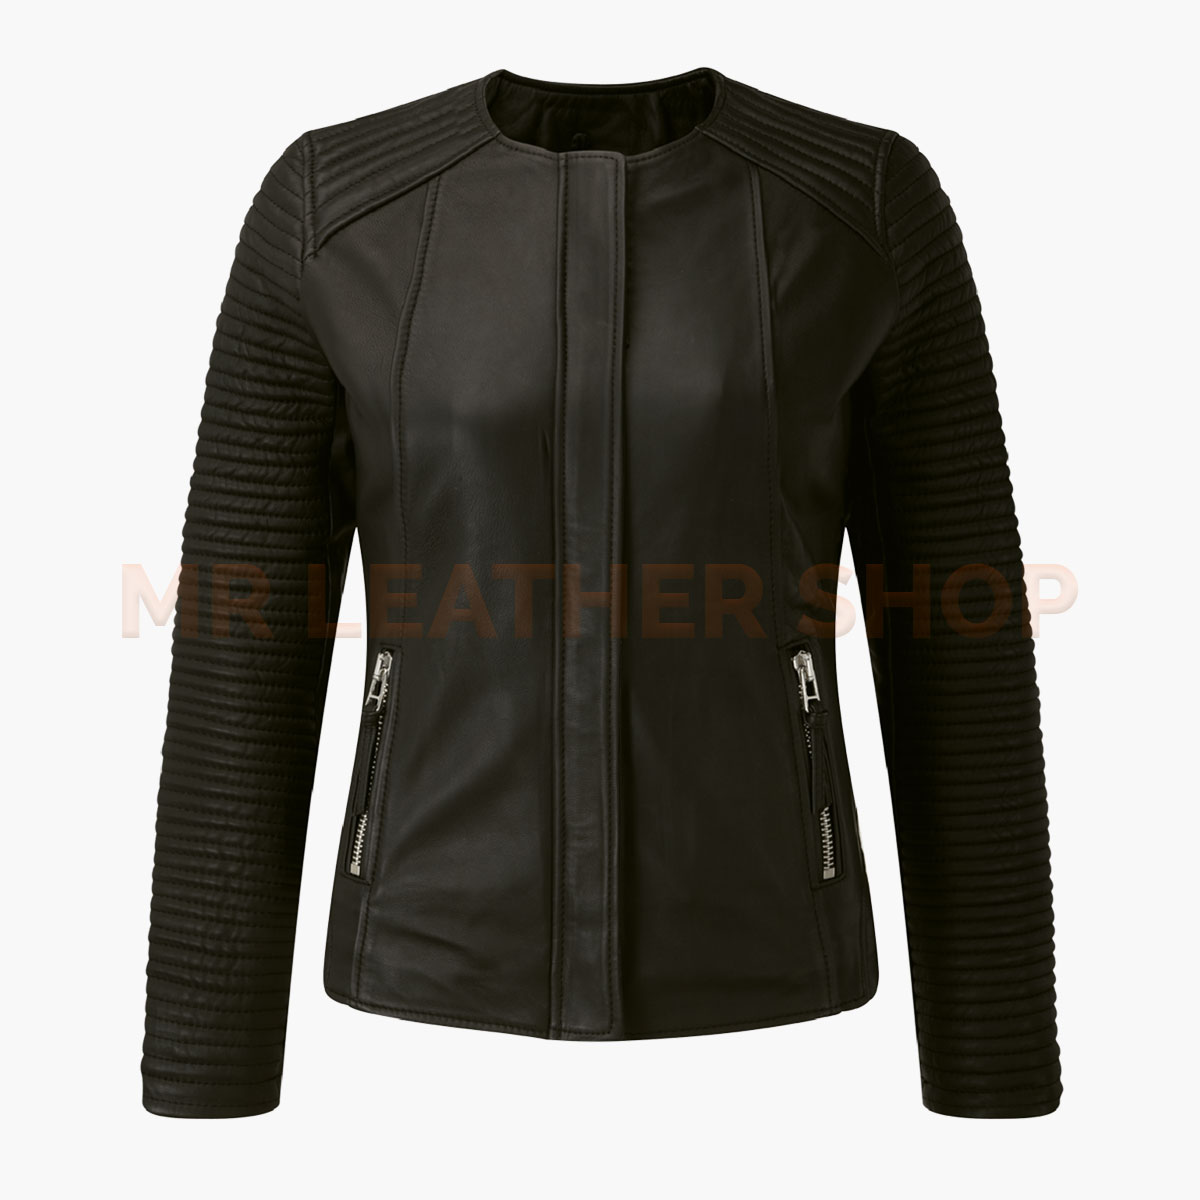 Black Leather Jacket Outfit Womens - Mr Leather Shop